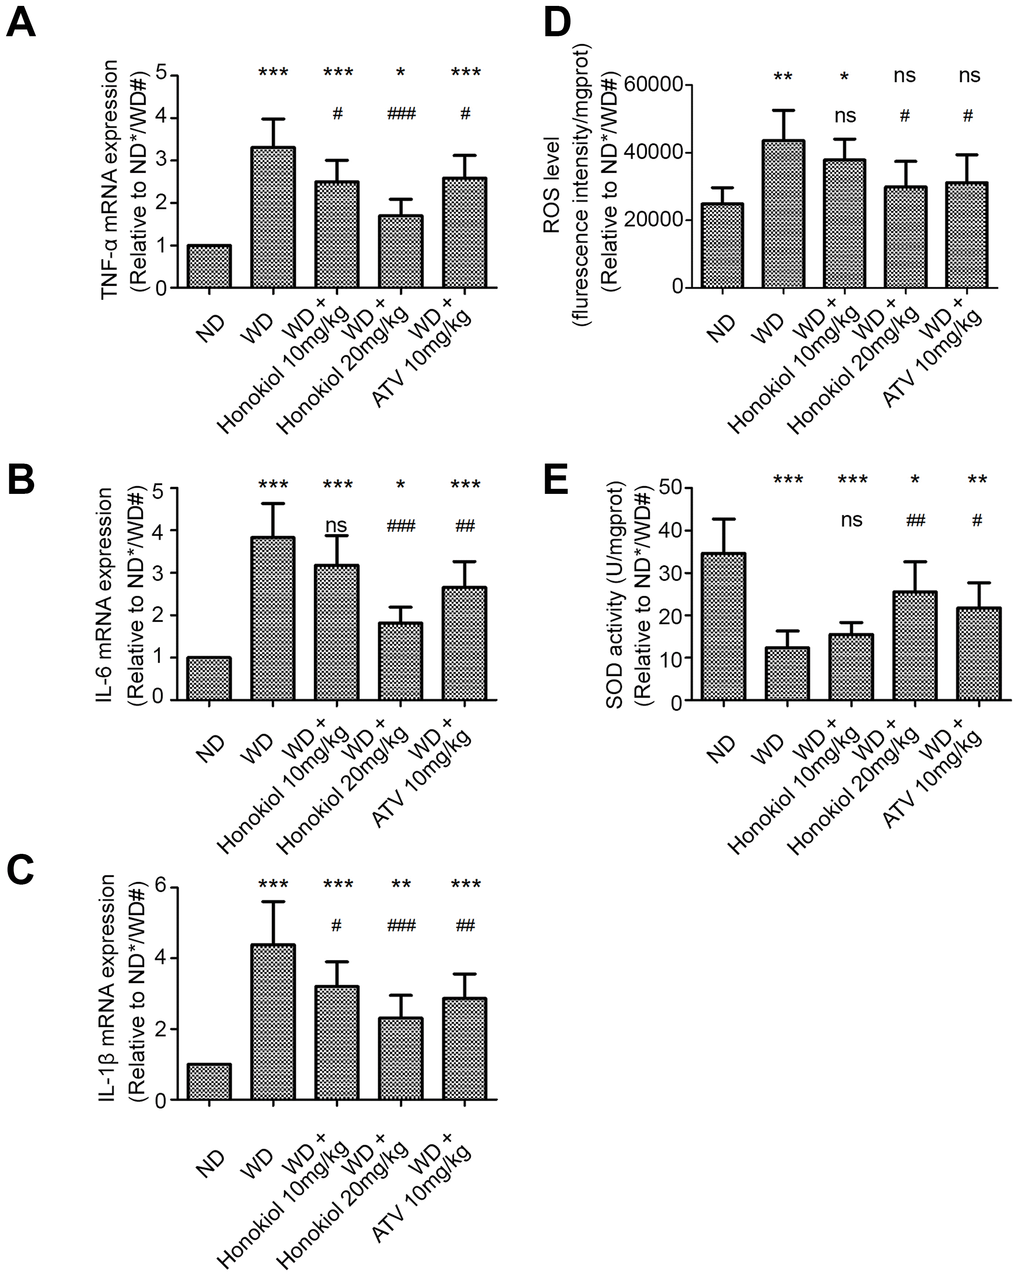 Effect of honokiol on inflammatory response and oxidative stress in the carotid tissue of atherosclerotic mice. (A–C) The mRNA expression of TNF-α (A), IL-6 (B), and IL-1β (C) in carotid tissue was detected by real-time PCR. (n = 6; * P P P P P P D, E) The ROS level (D) and SOD activity (E) in carotid tissue were detected by commercial kits in the indicated group. (n = 6; * P P P P P P 